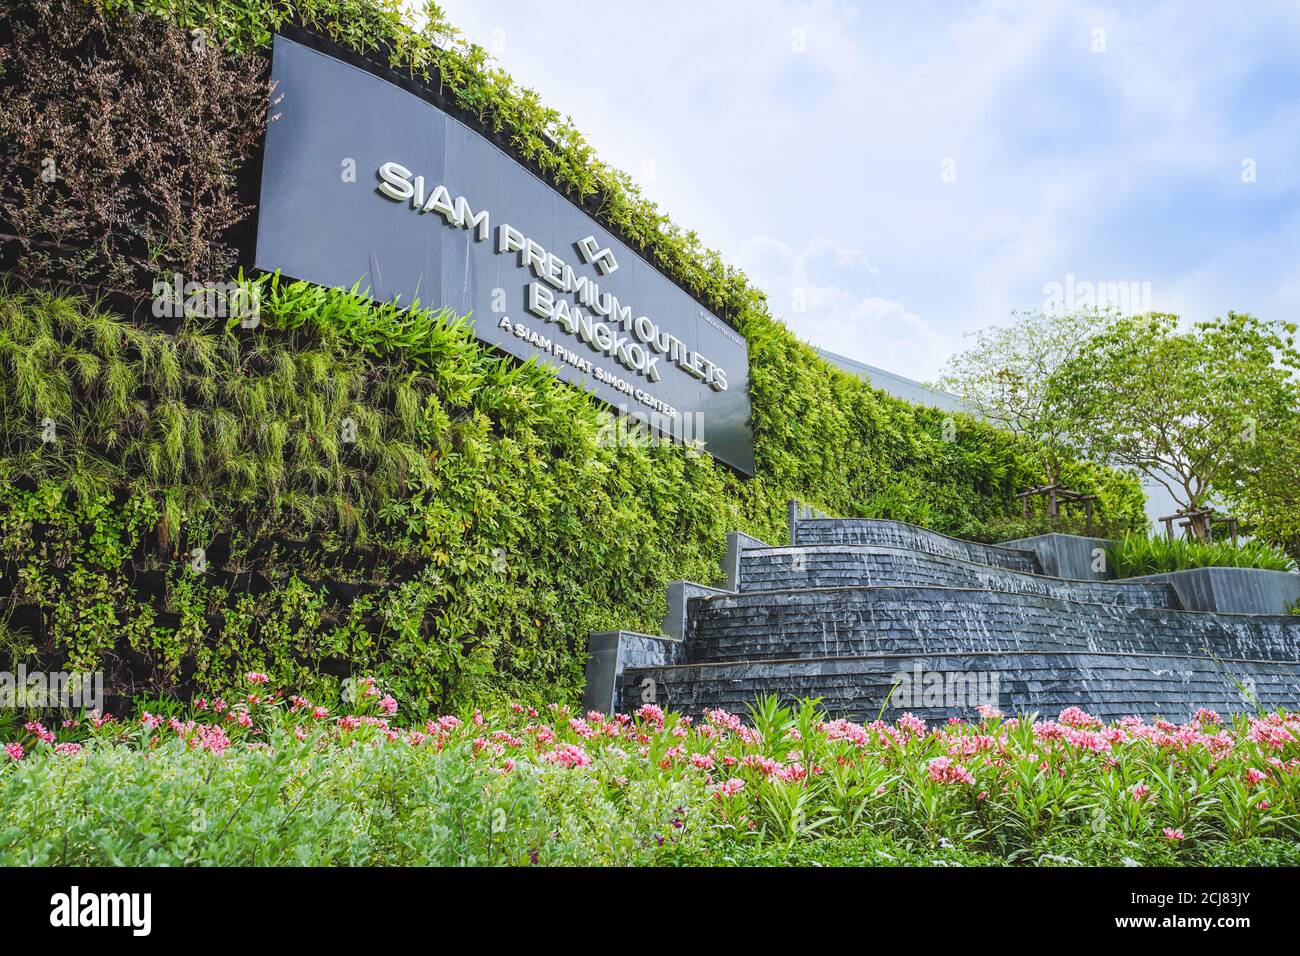 Samut Prakan, Thailand - July 28, 2020: Scenery of Siam Premium Outlets Bangkok located on the eastern outskirts of Bangkok and this is home to a str Stock Photo Alamy